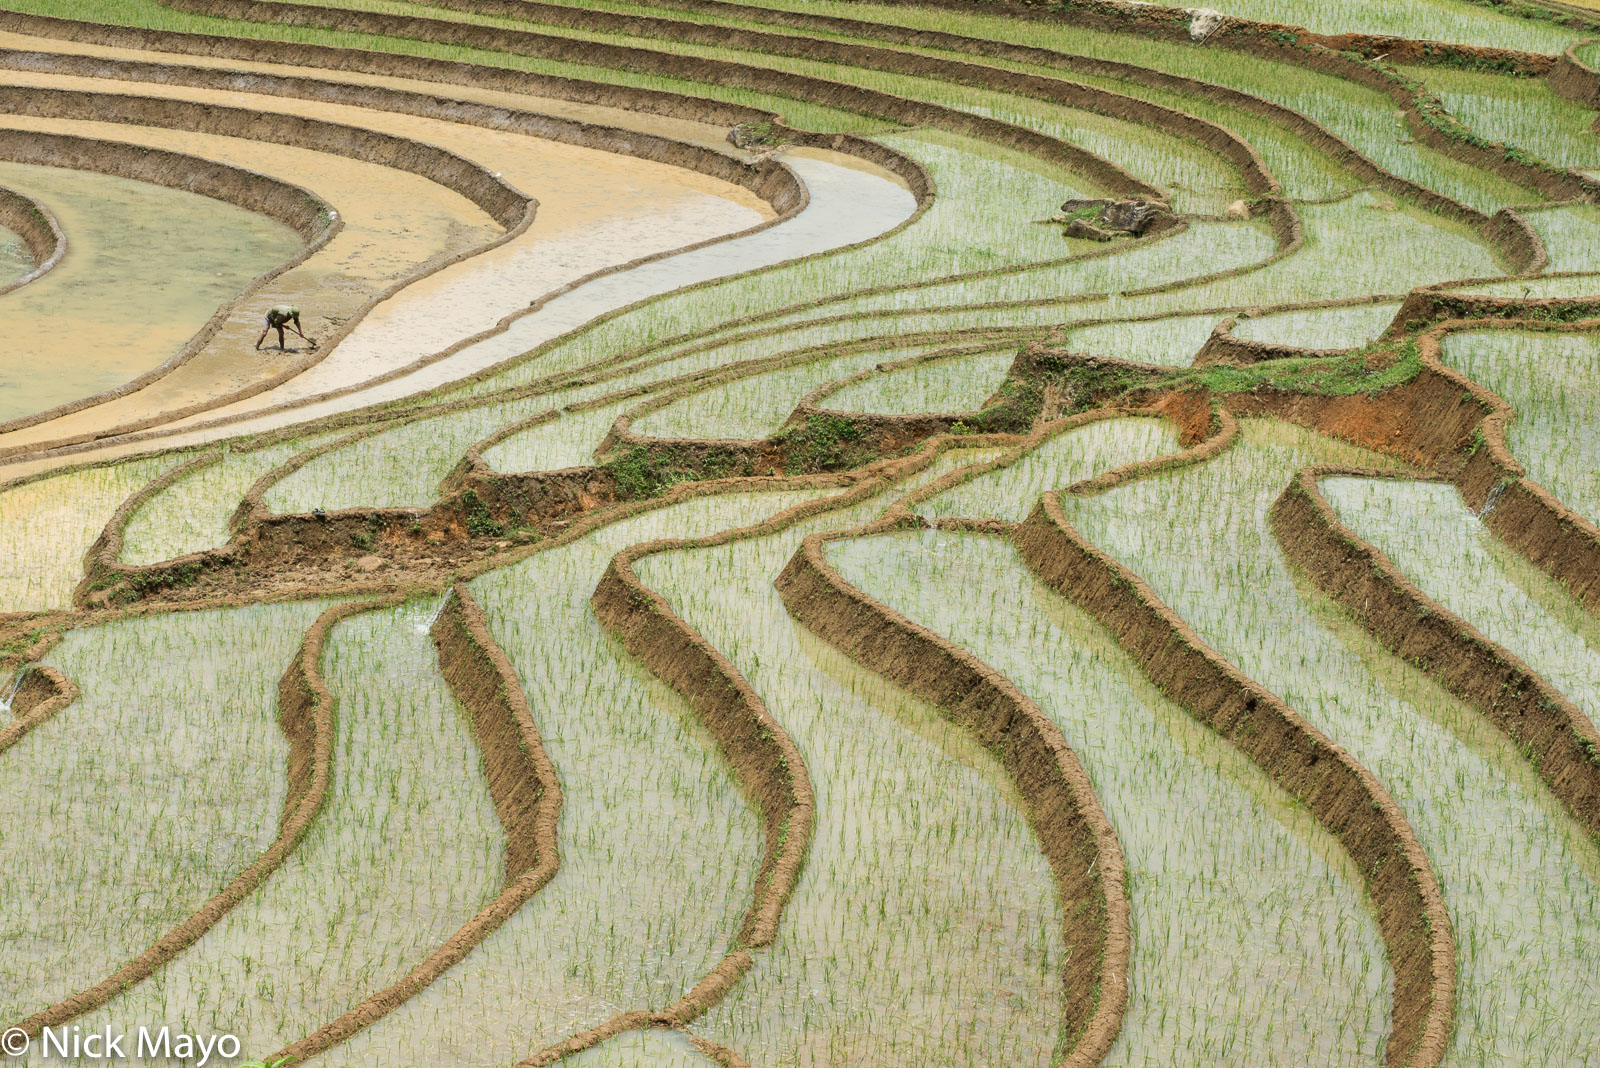 A farmer working near his newly planted paddy rice fields outside of Y Ty.